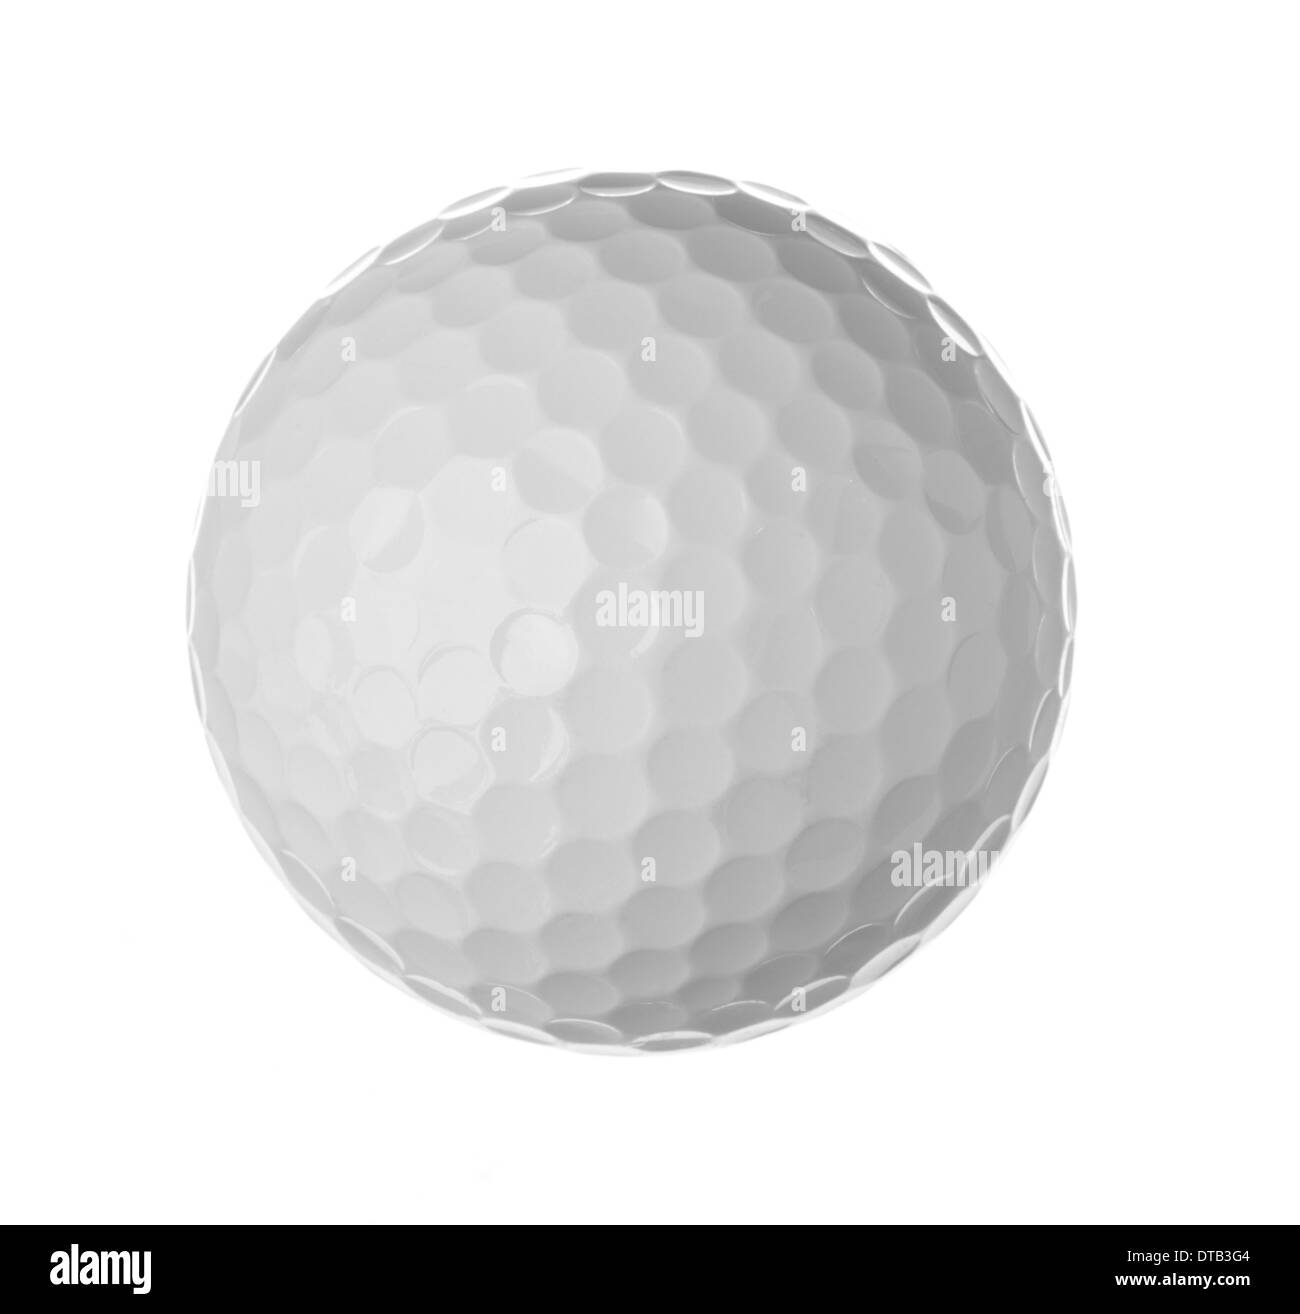 Closeup view of one golf ball isolated on white background Stock Photo